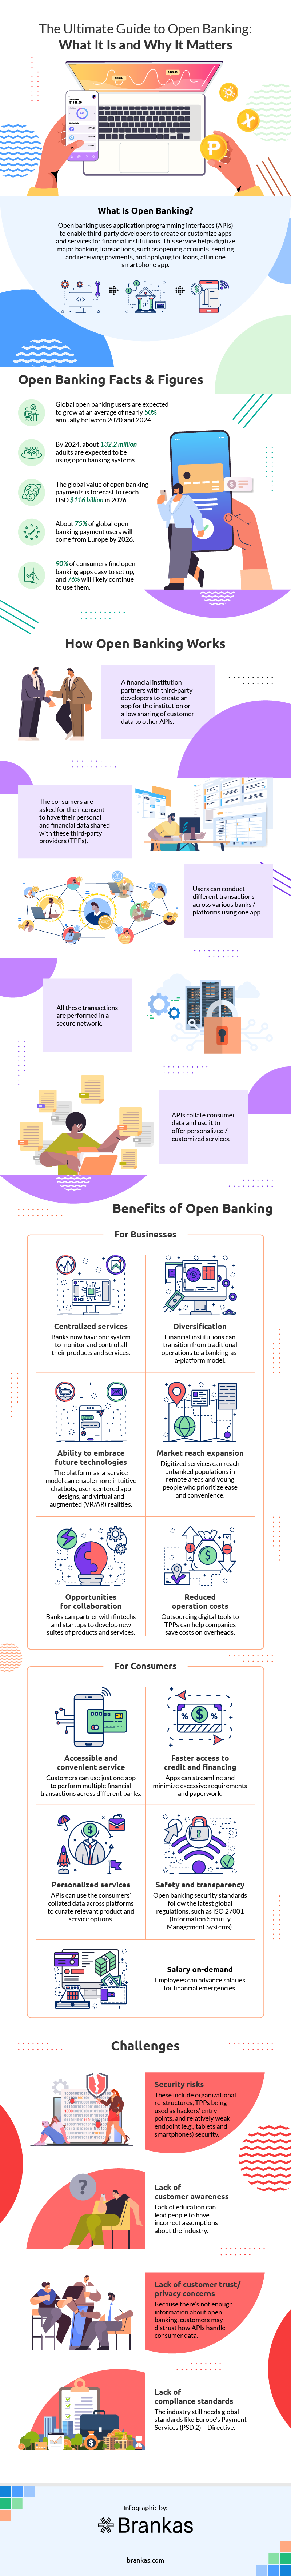 The Ultimate Guide to Open Banking: What It Is and Why It Matters